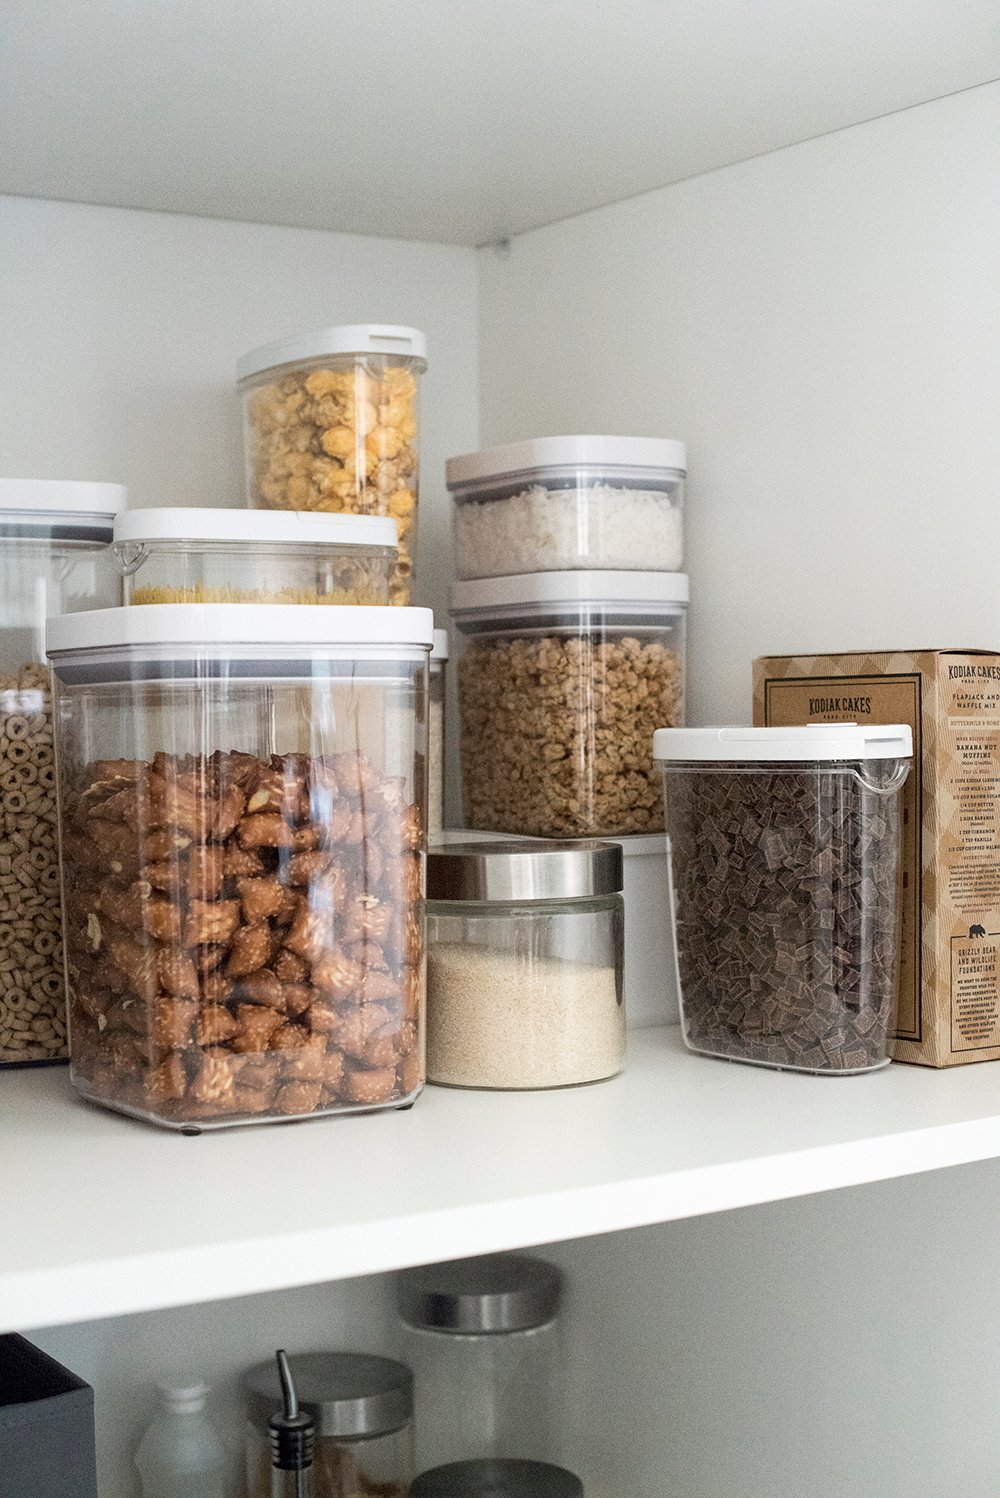 Tips for Organizing a Pantry - roomfortuesday.com